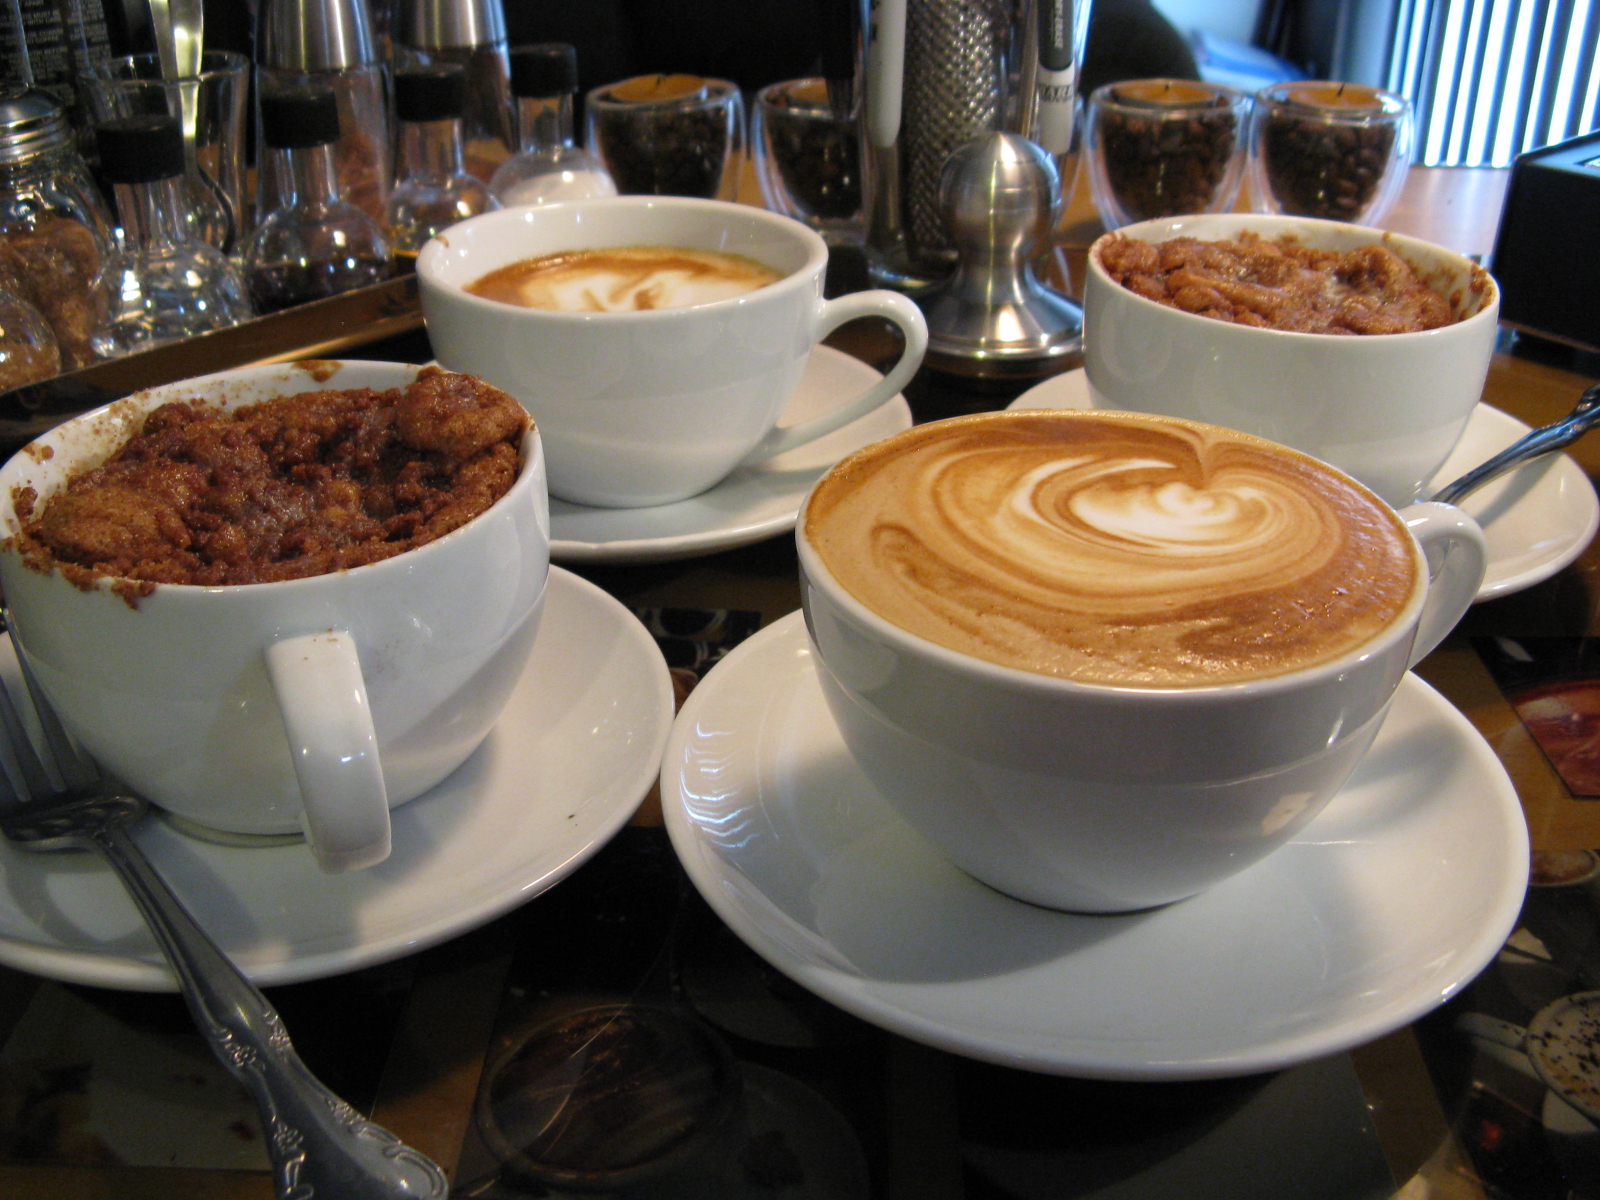 Cappuccinos and coffee cake, baked in capp cups